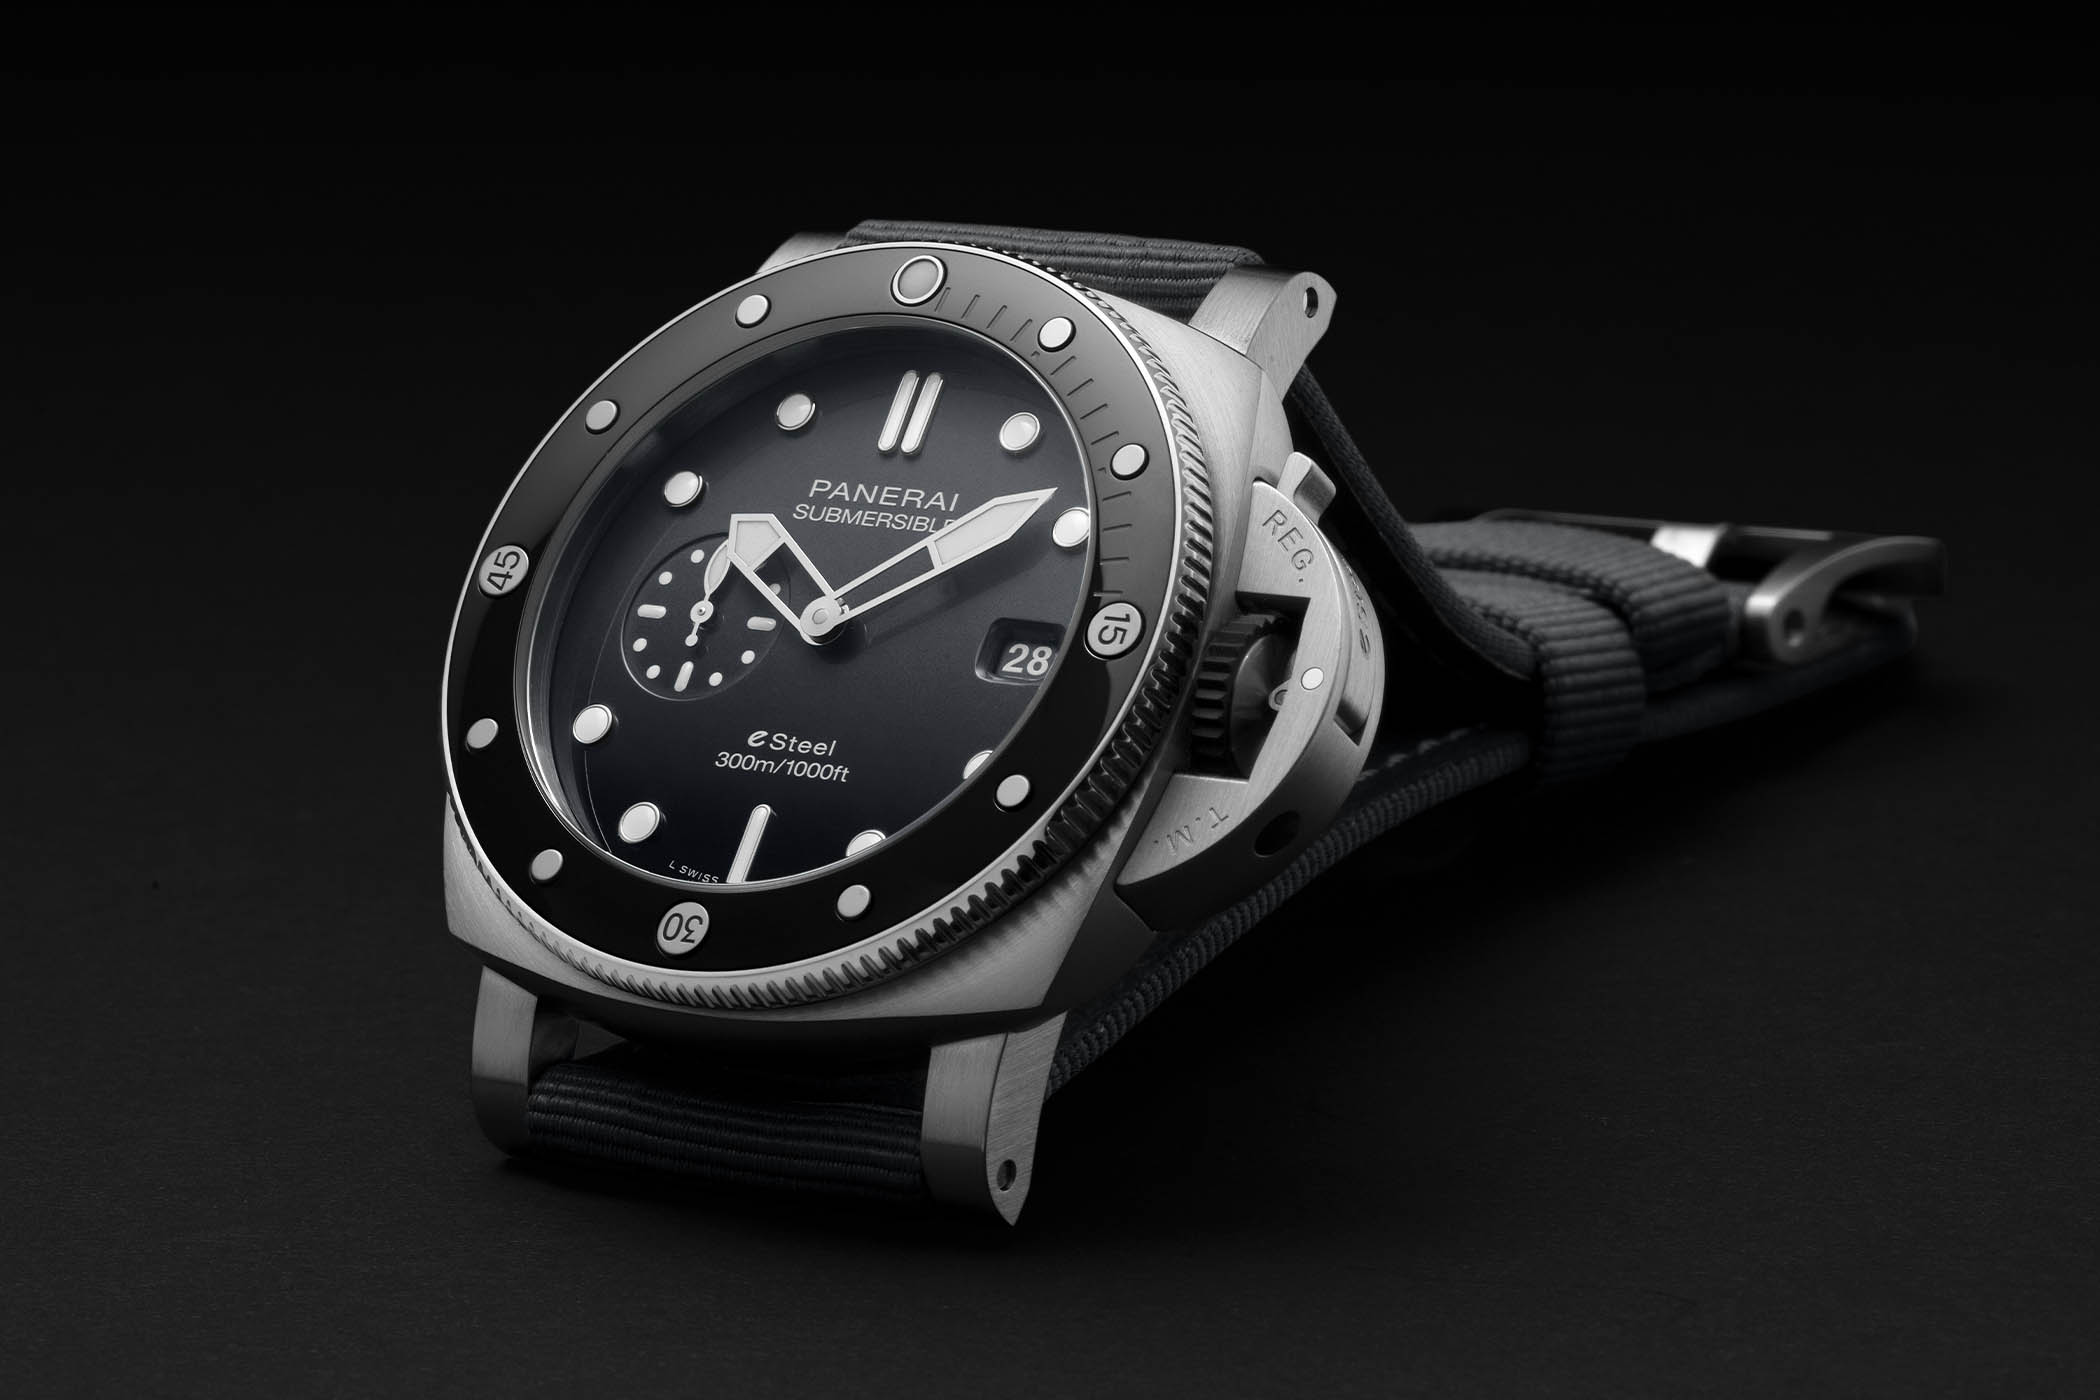 introducing all new Panerai Submersible QuarantaQuattro of Watches and Wonders 2022